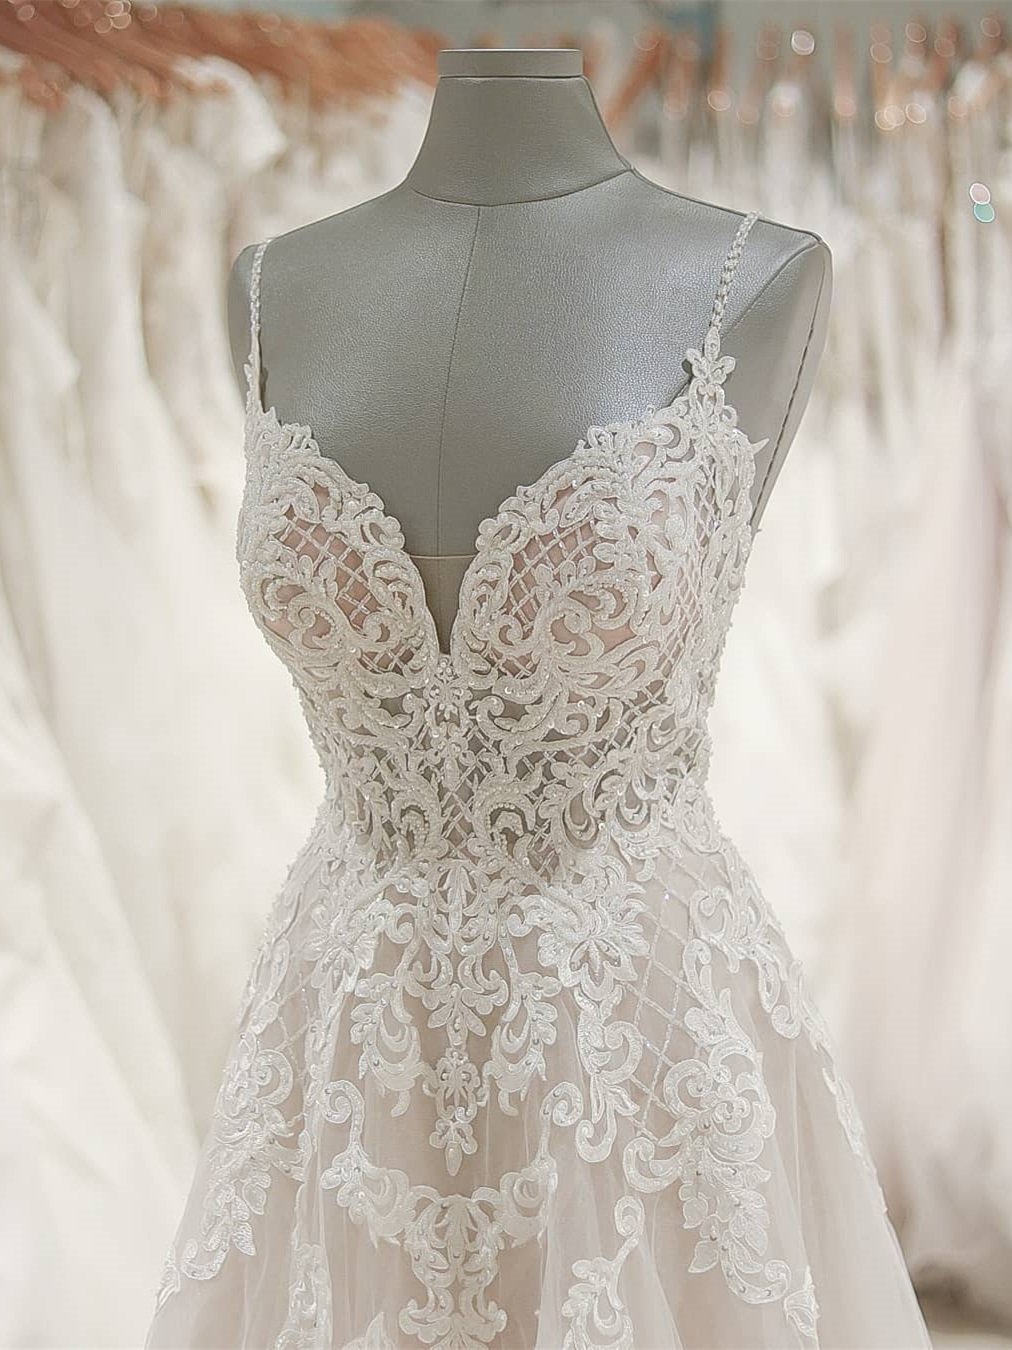 Most Stunning A-line Spaghetti Straps Lace Wedding Dress with Low Back GDC1030-Dolly Gown